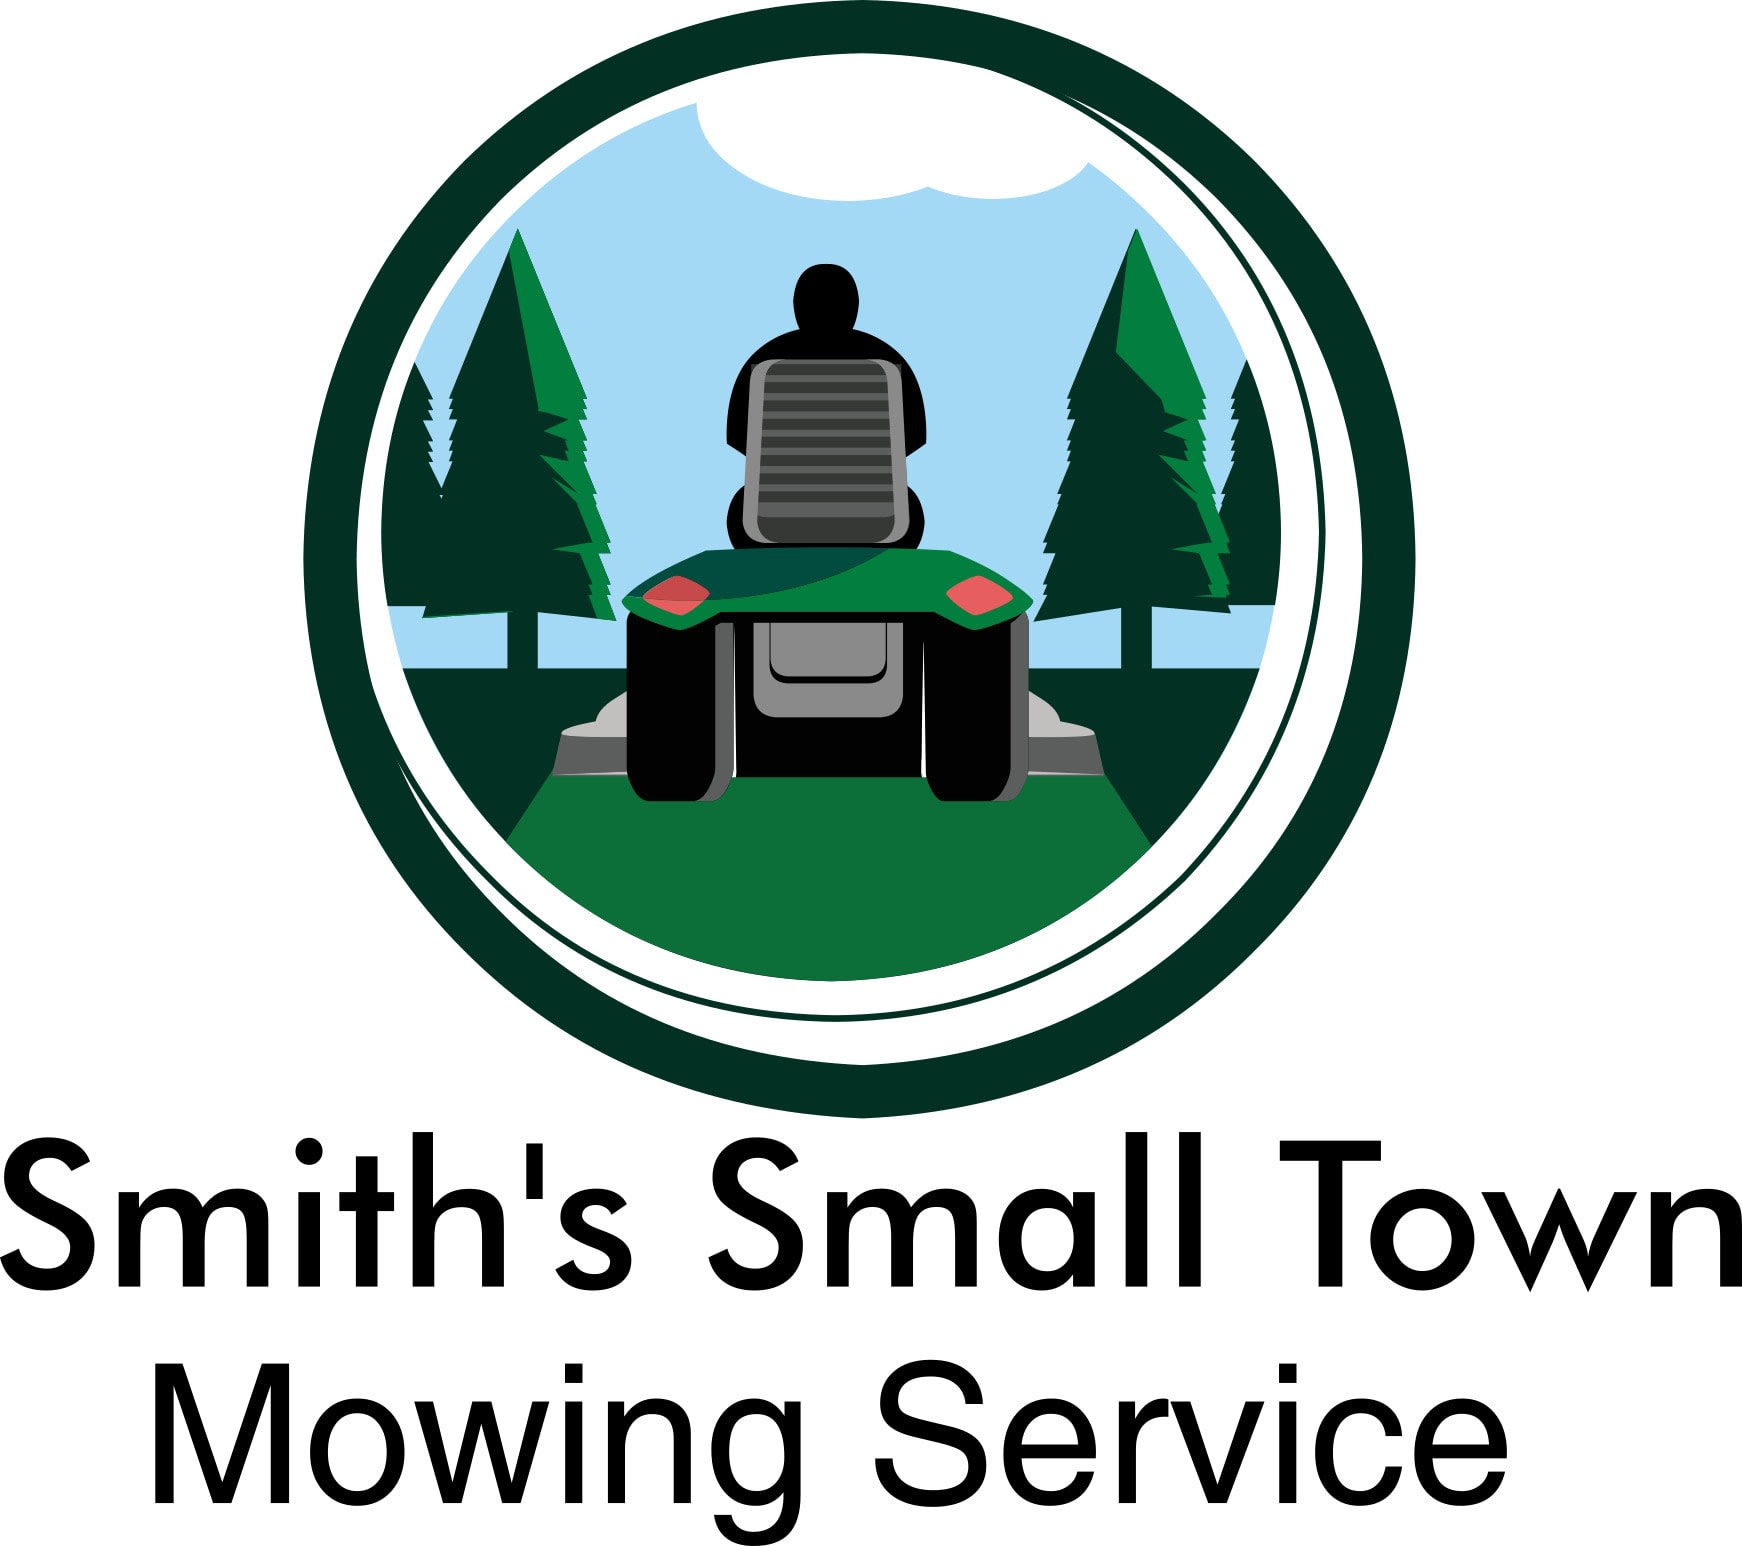 Smith's Small Town Mowing